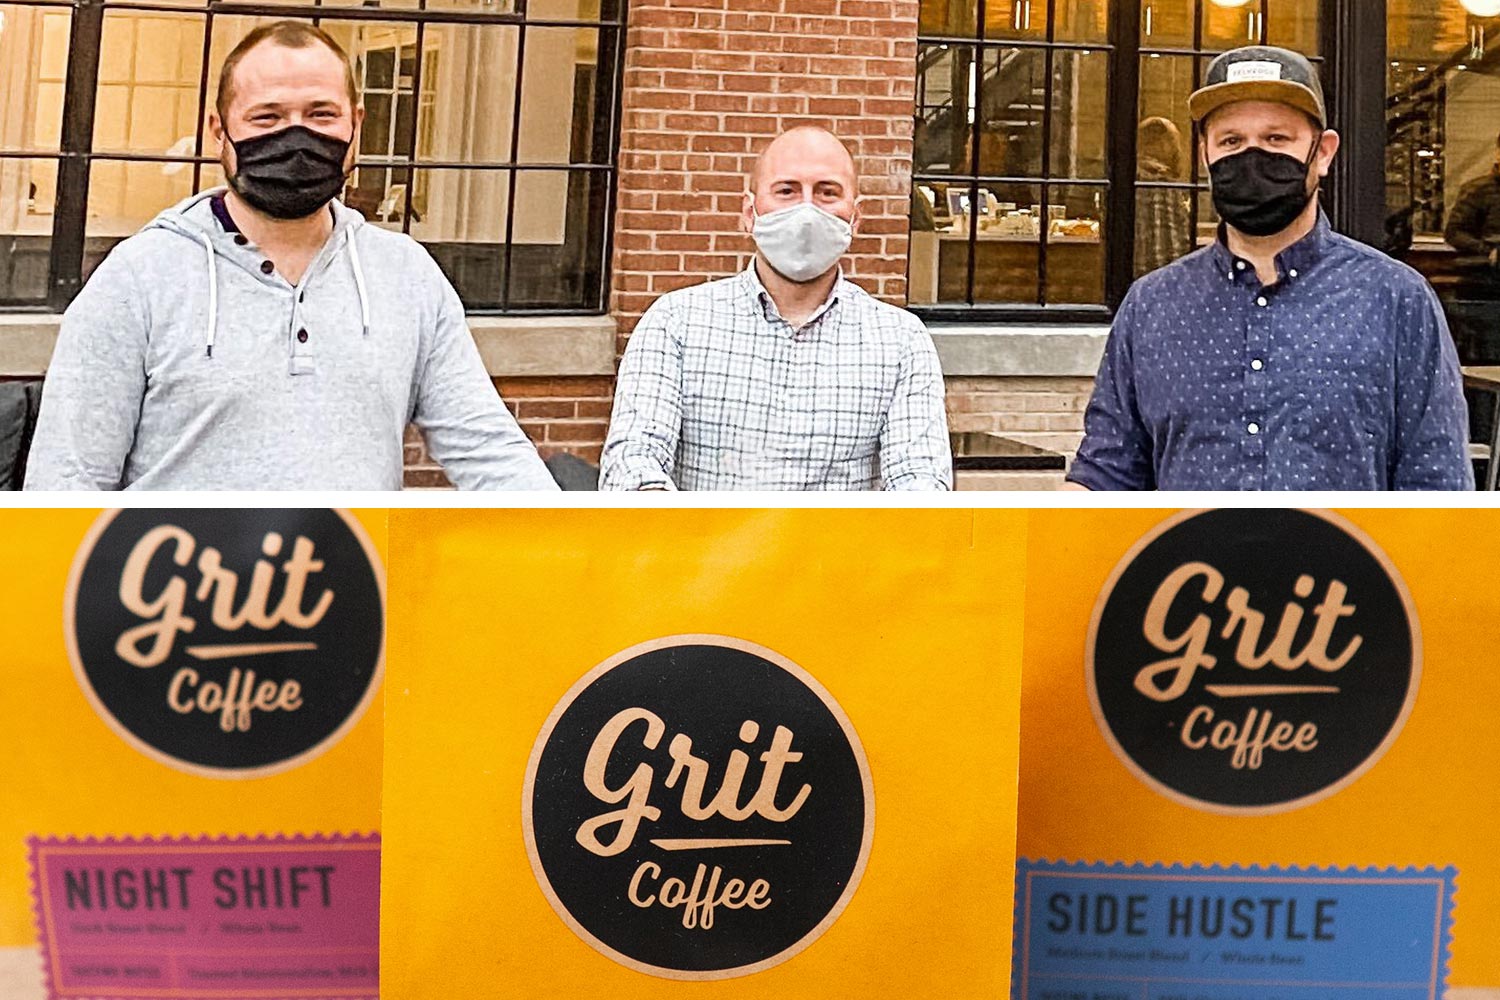 Headshots of alumni Brad Uhl, Dan FitzHenry and Brandon Wooten’s on top and the bottom has pictures of Grit Coffee in bags